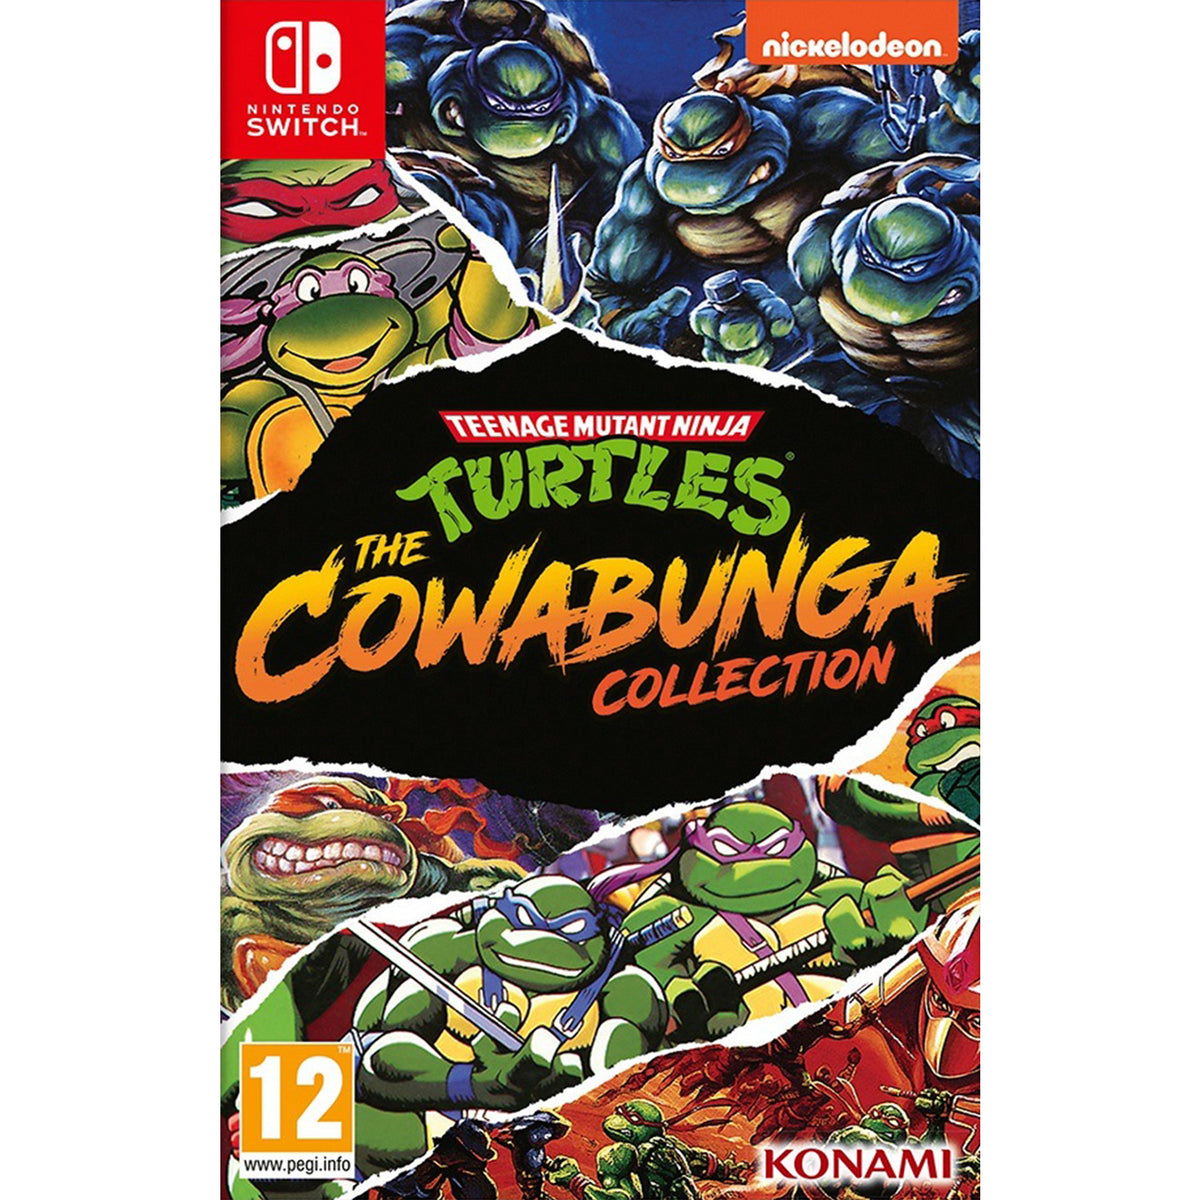 Go\'s Mutant Of Deal Teenage Turtles: Switch Collection - Ninja – The Day! Cowabunga Entertainment The